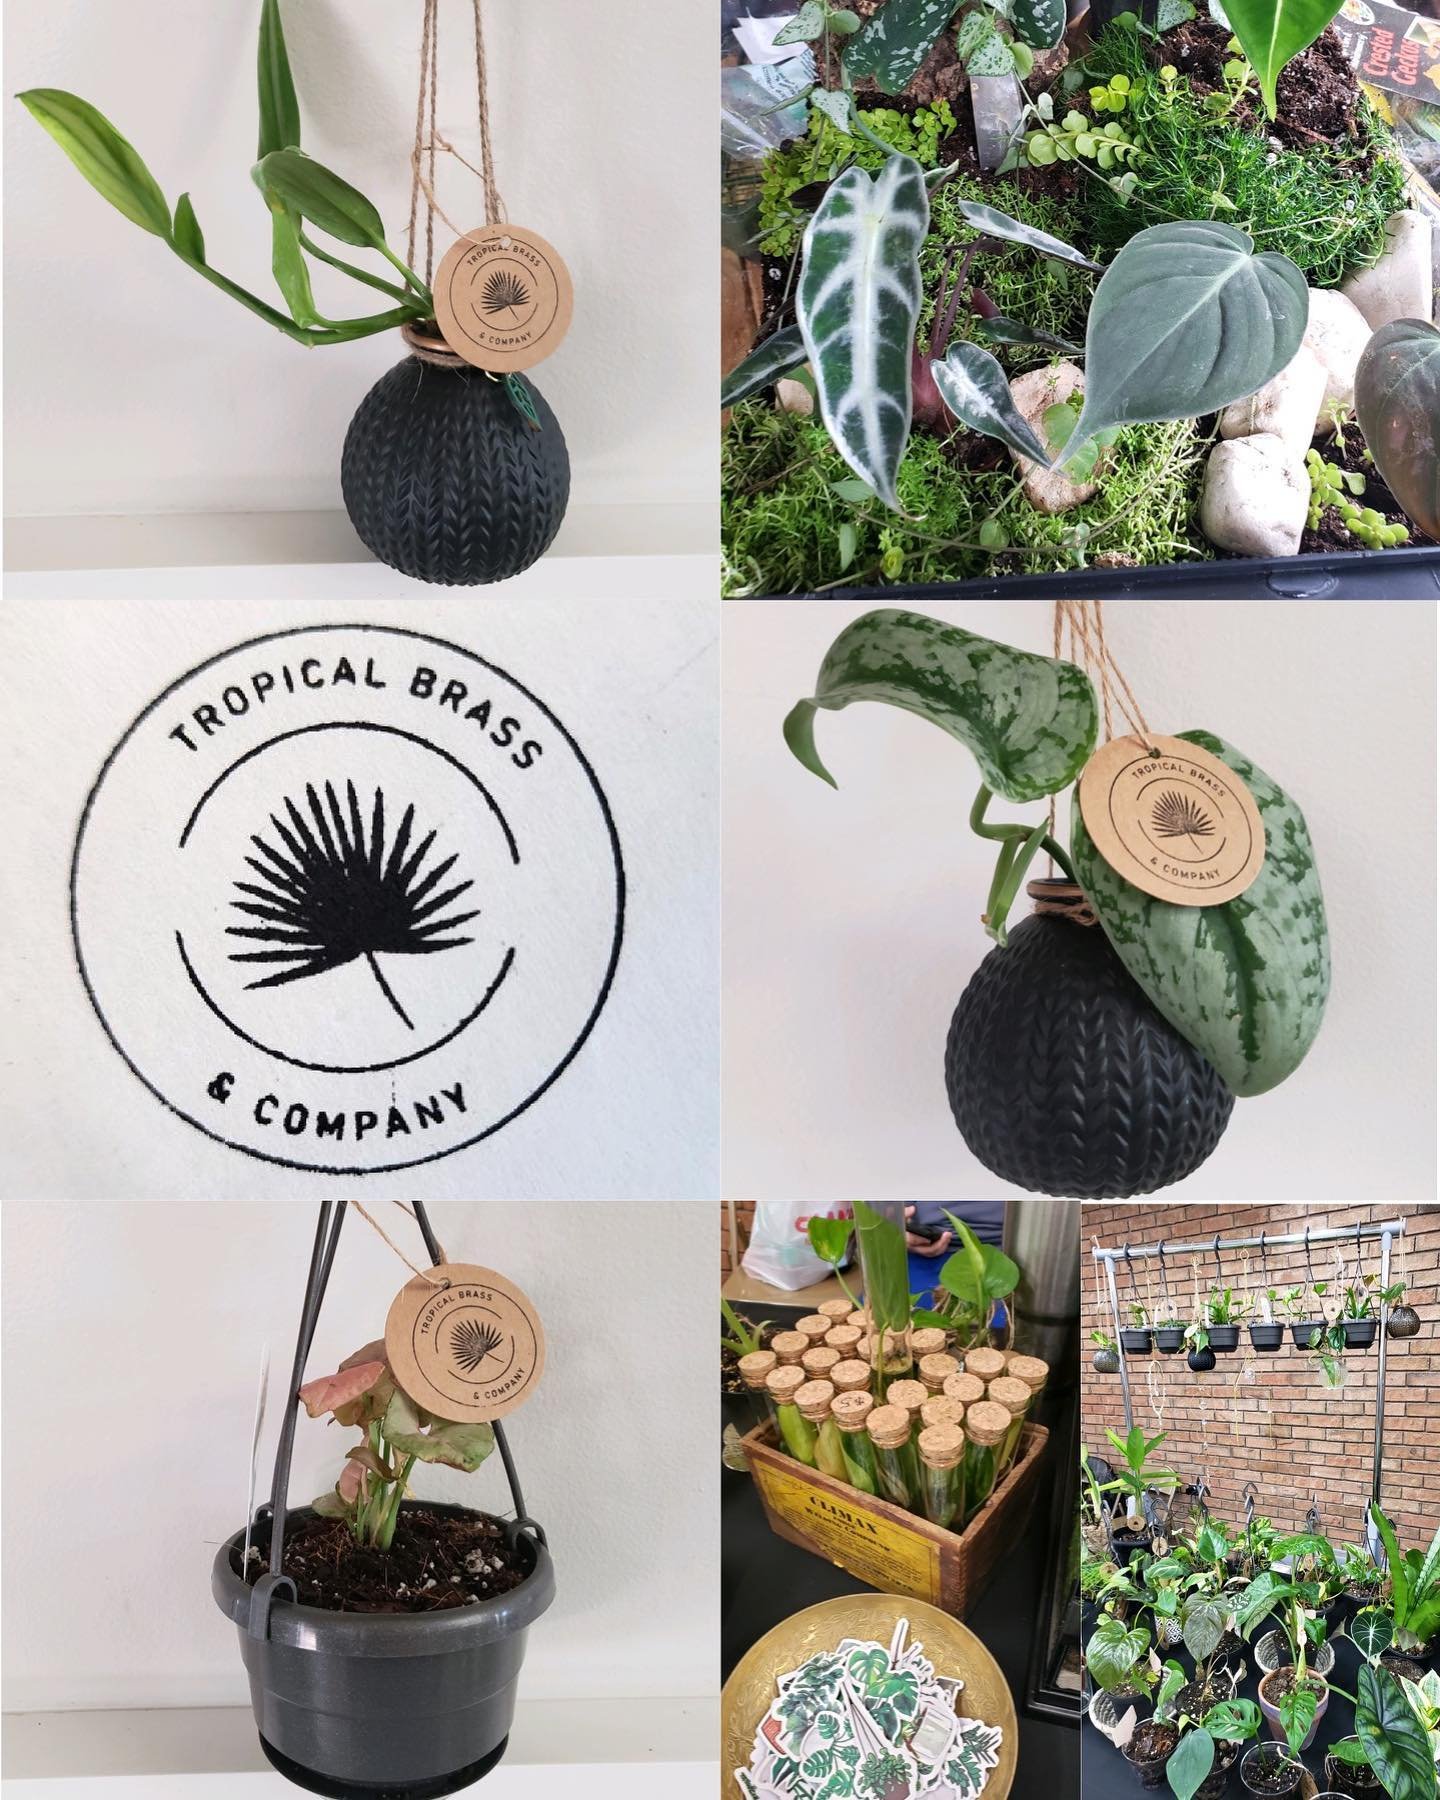 Tropical Brass &amp; Company will be joining us June 2nd!

They are a local company passionate about delivering hand selected and styled plants and accessories to the lives, businesses and homes of their clients. They will also have a variety of terr